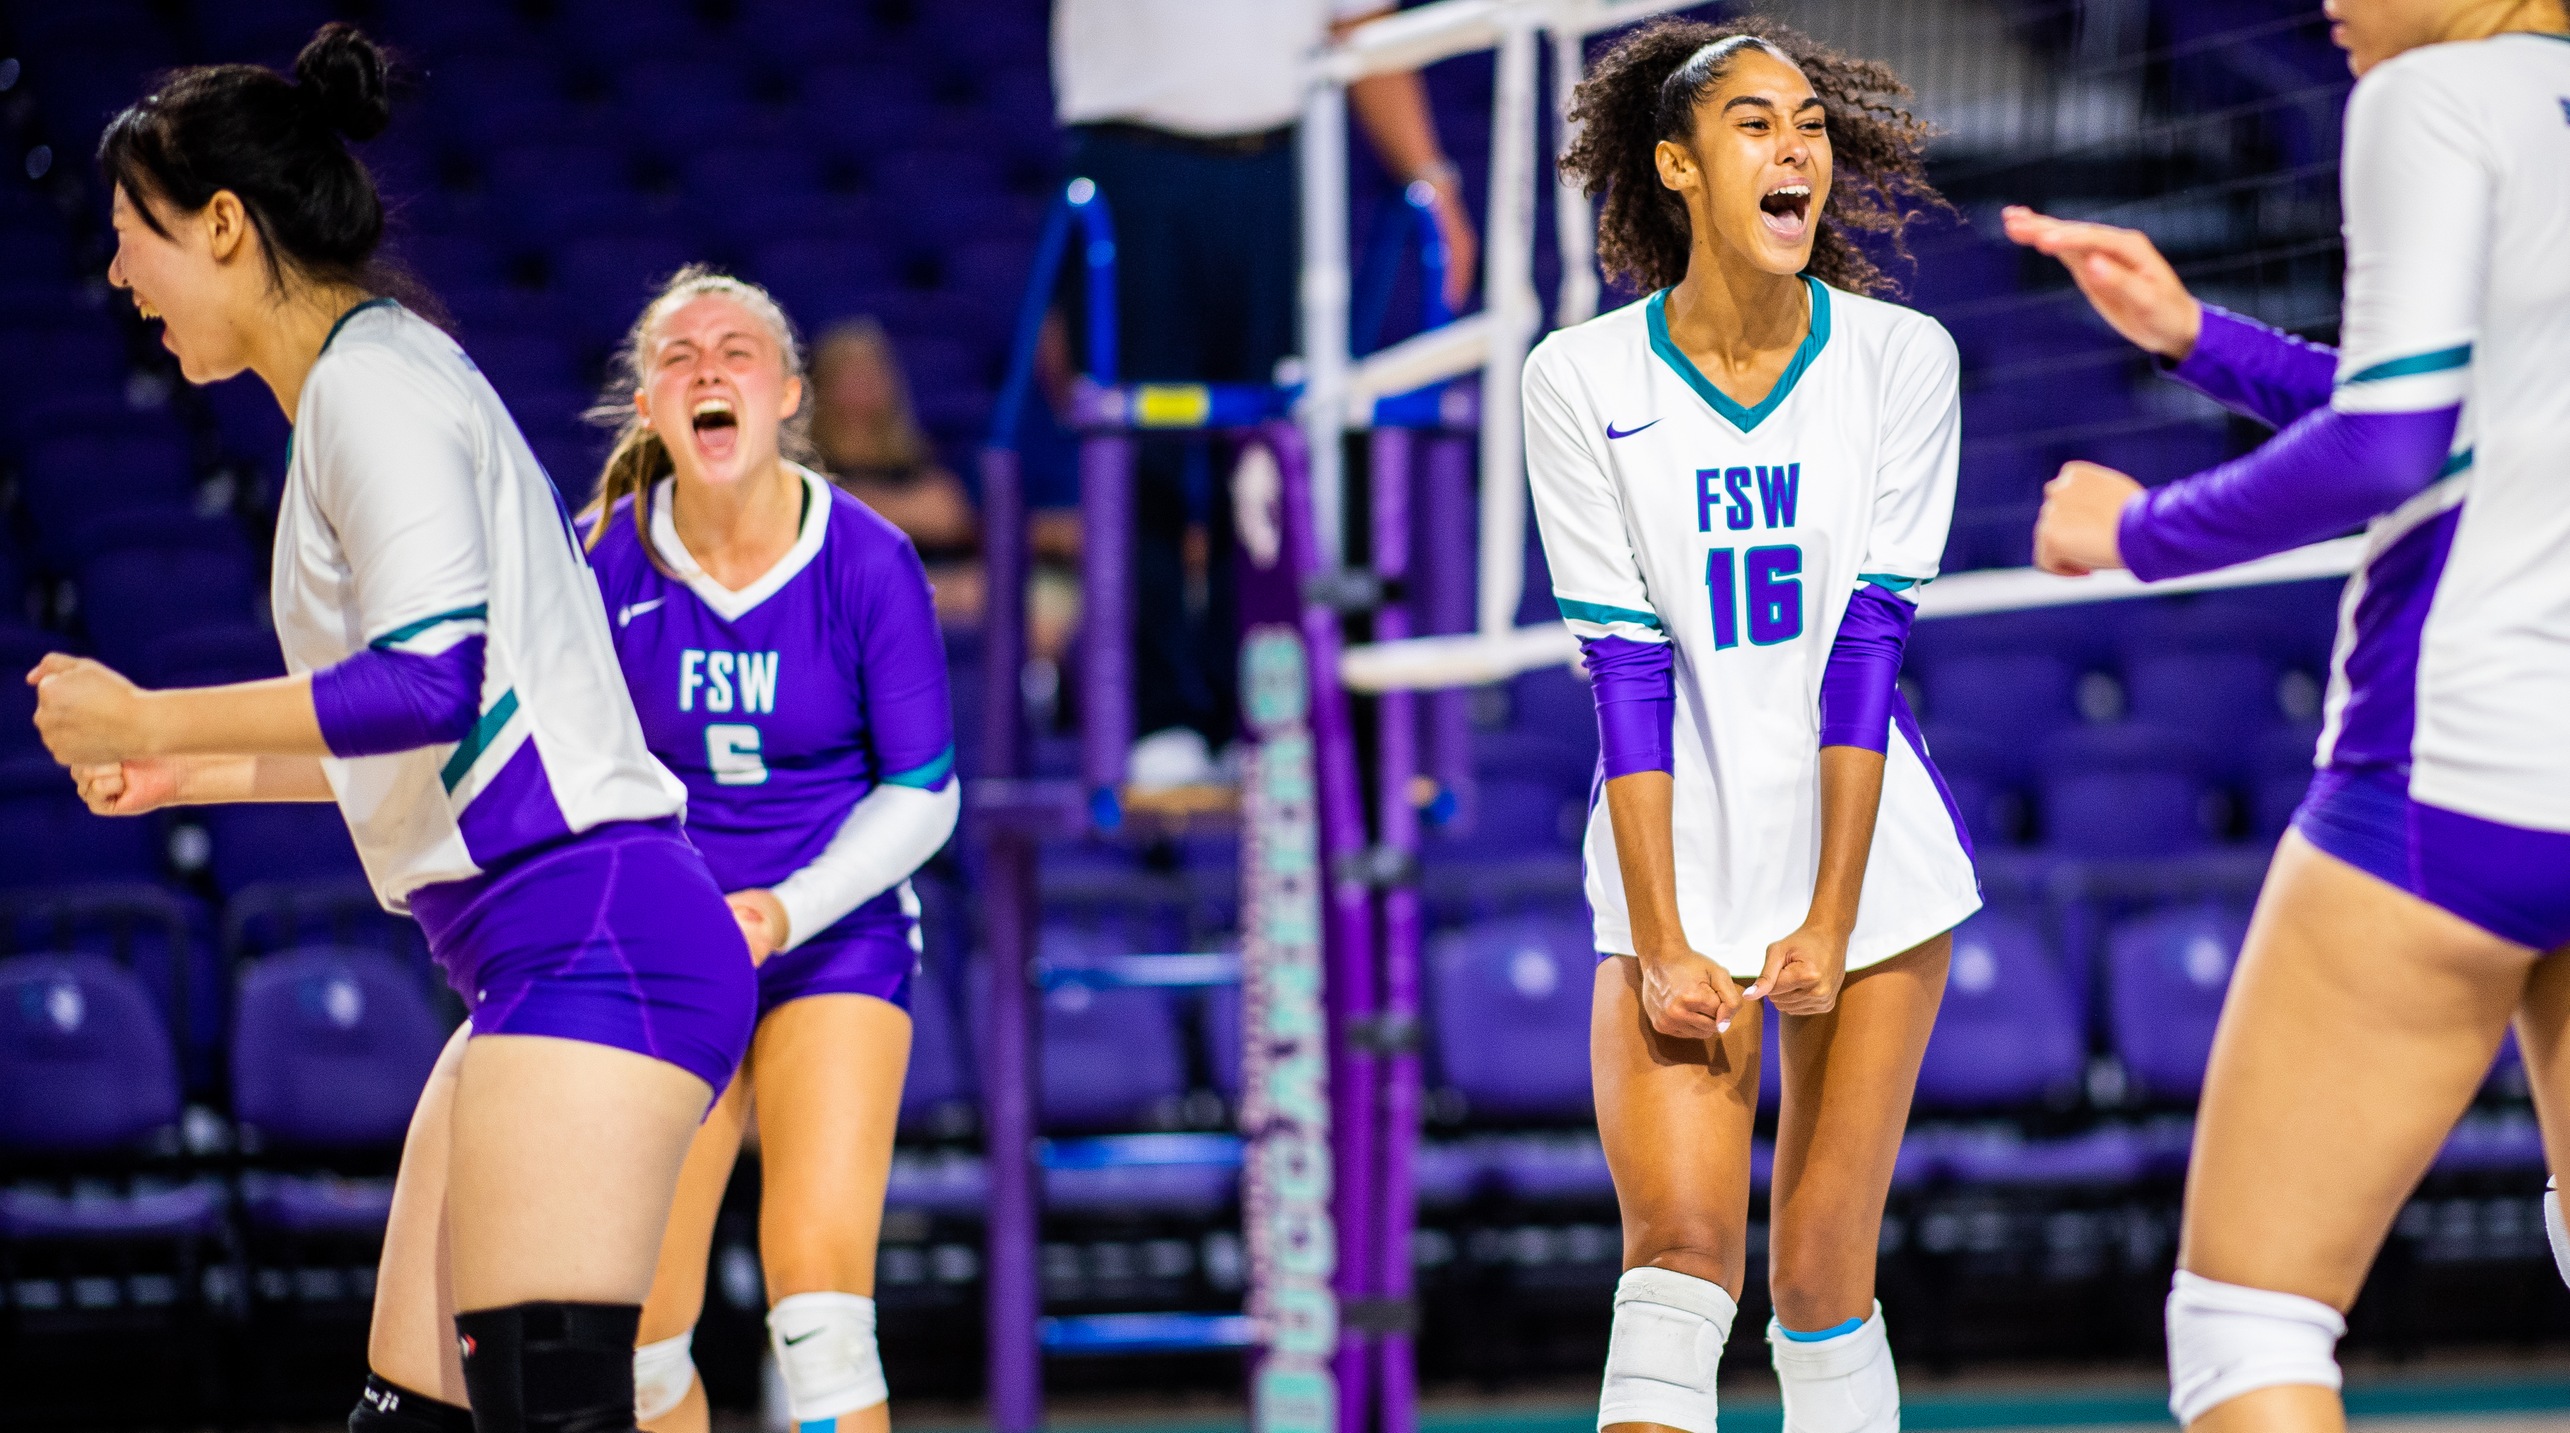 FSW celebrates a point in their five set win over #2 Miami Dade
Photo by Brad Young/BradYoungPhoto.com